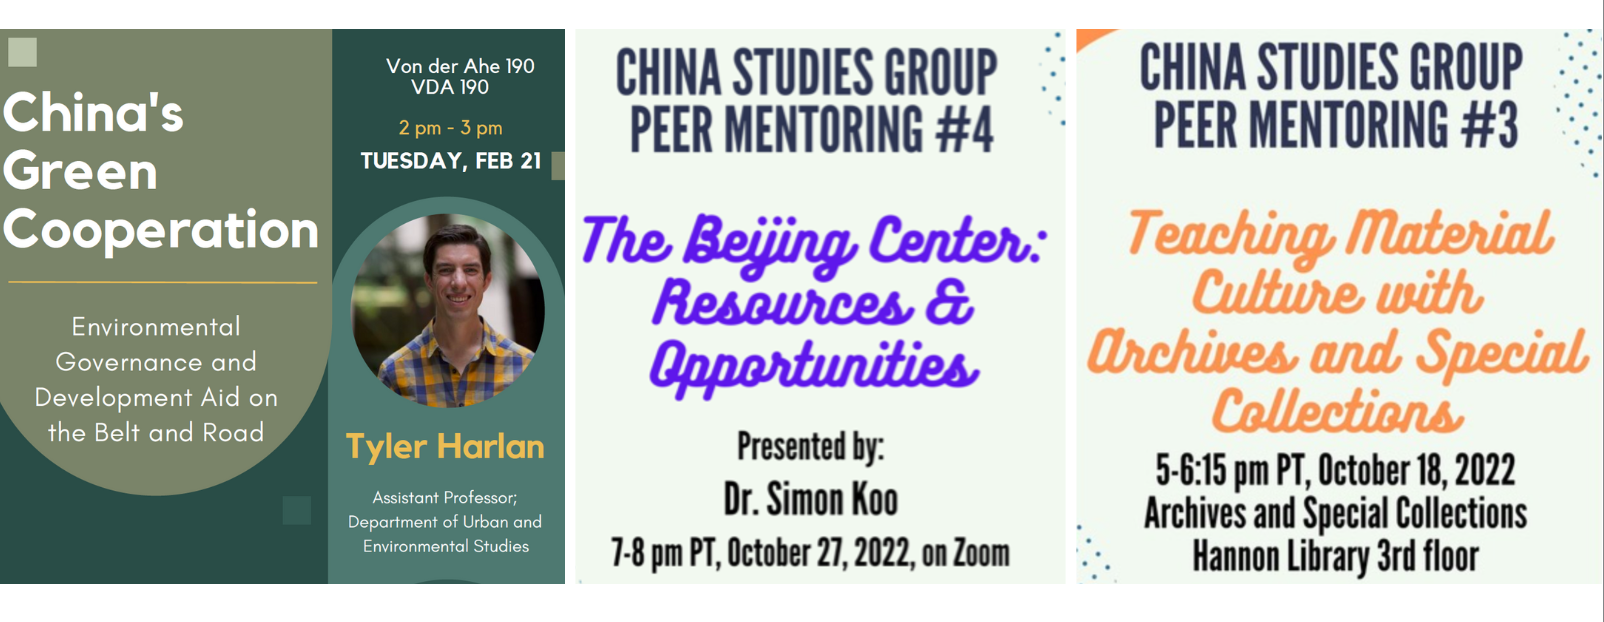 pic of different flyers related to China Studies Group